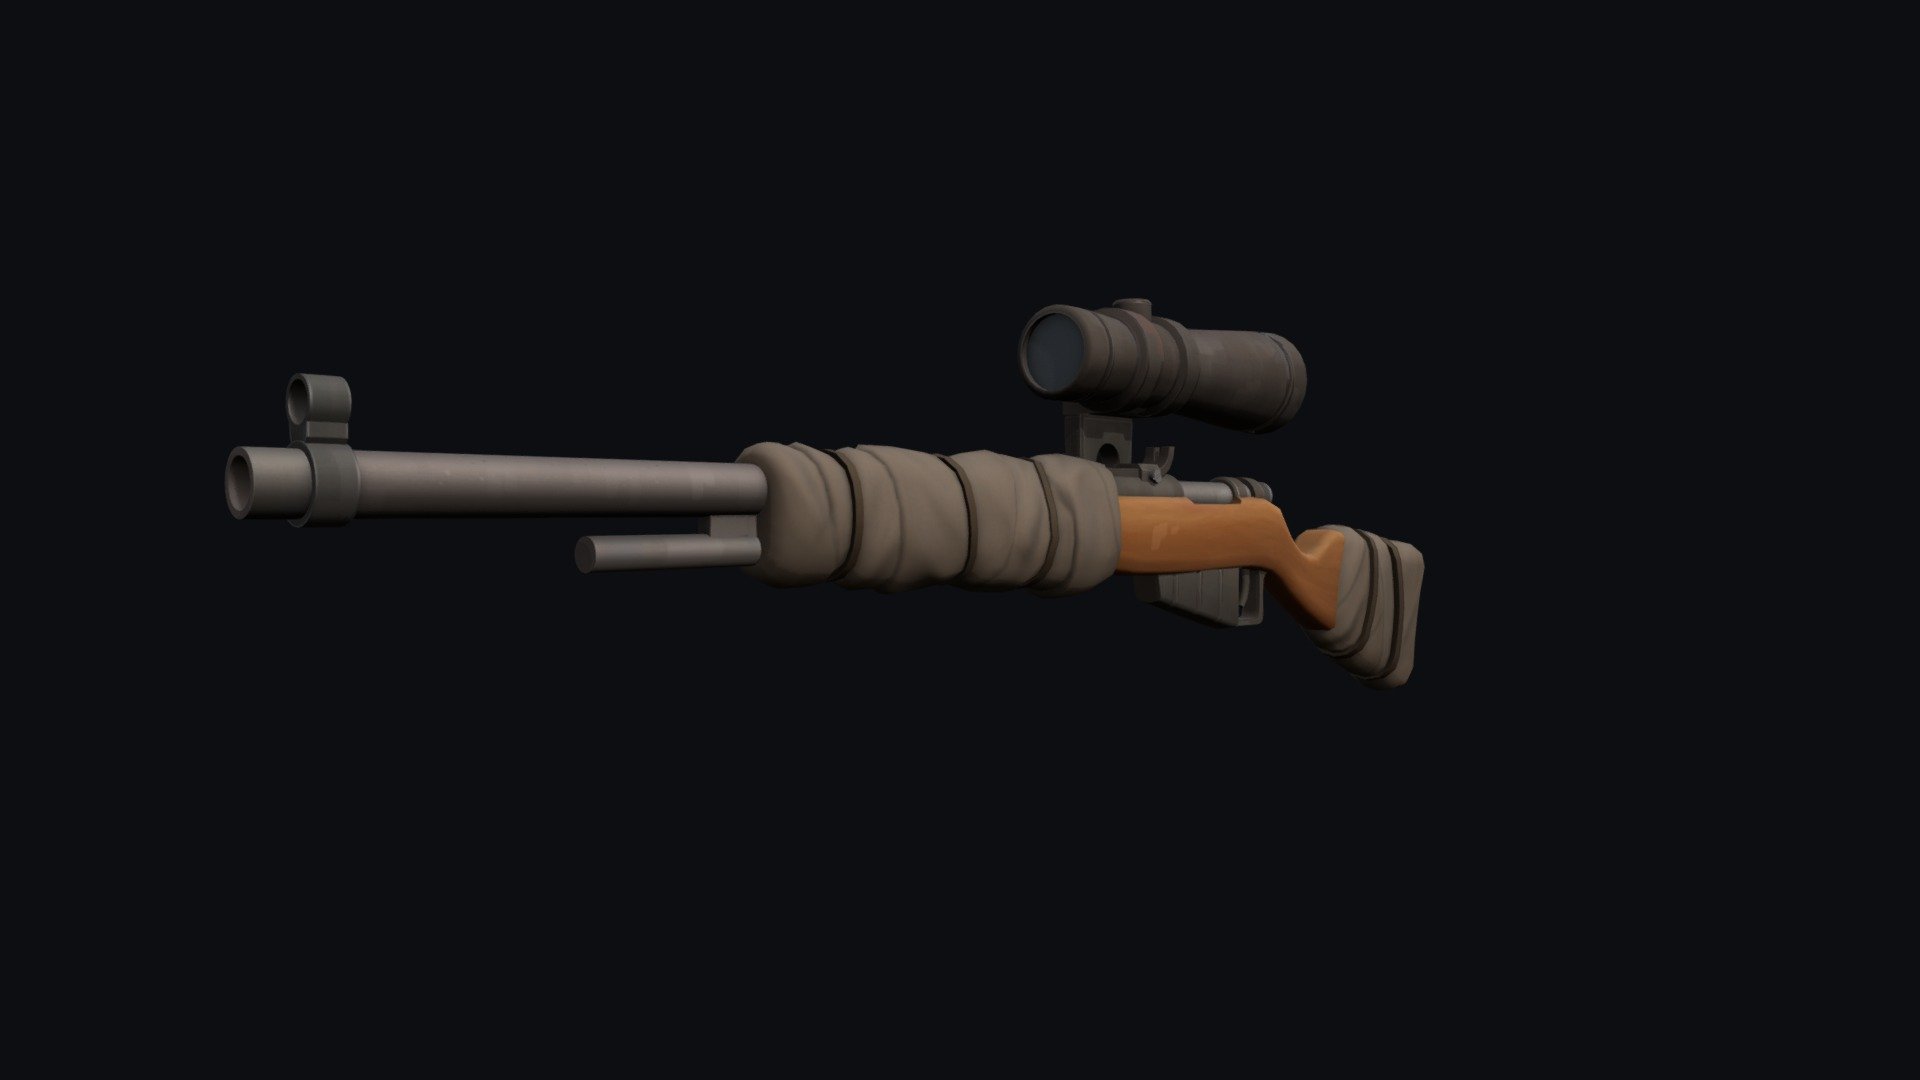 The Heavy Duty - Sniper Rifle for Team Fortress